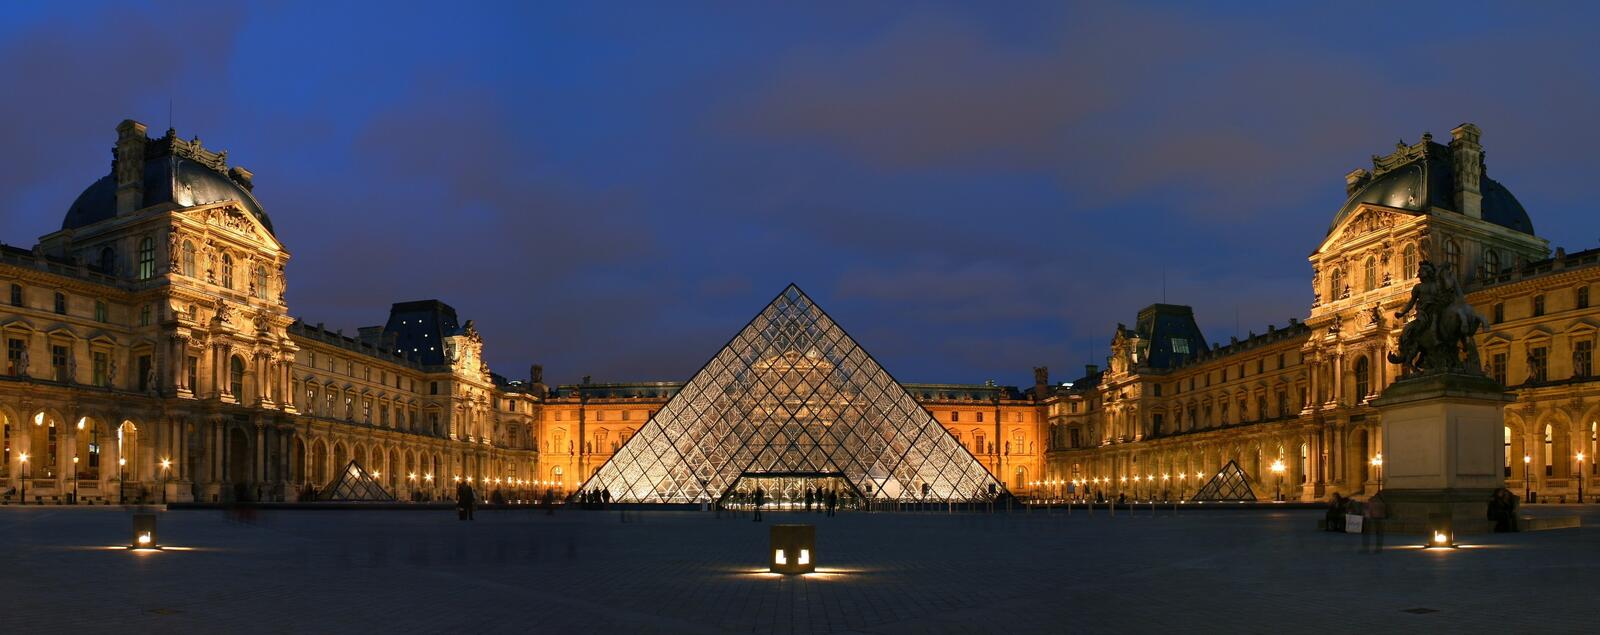 Free photo The Louvre in Paris